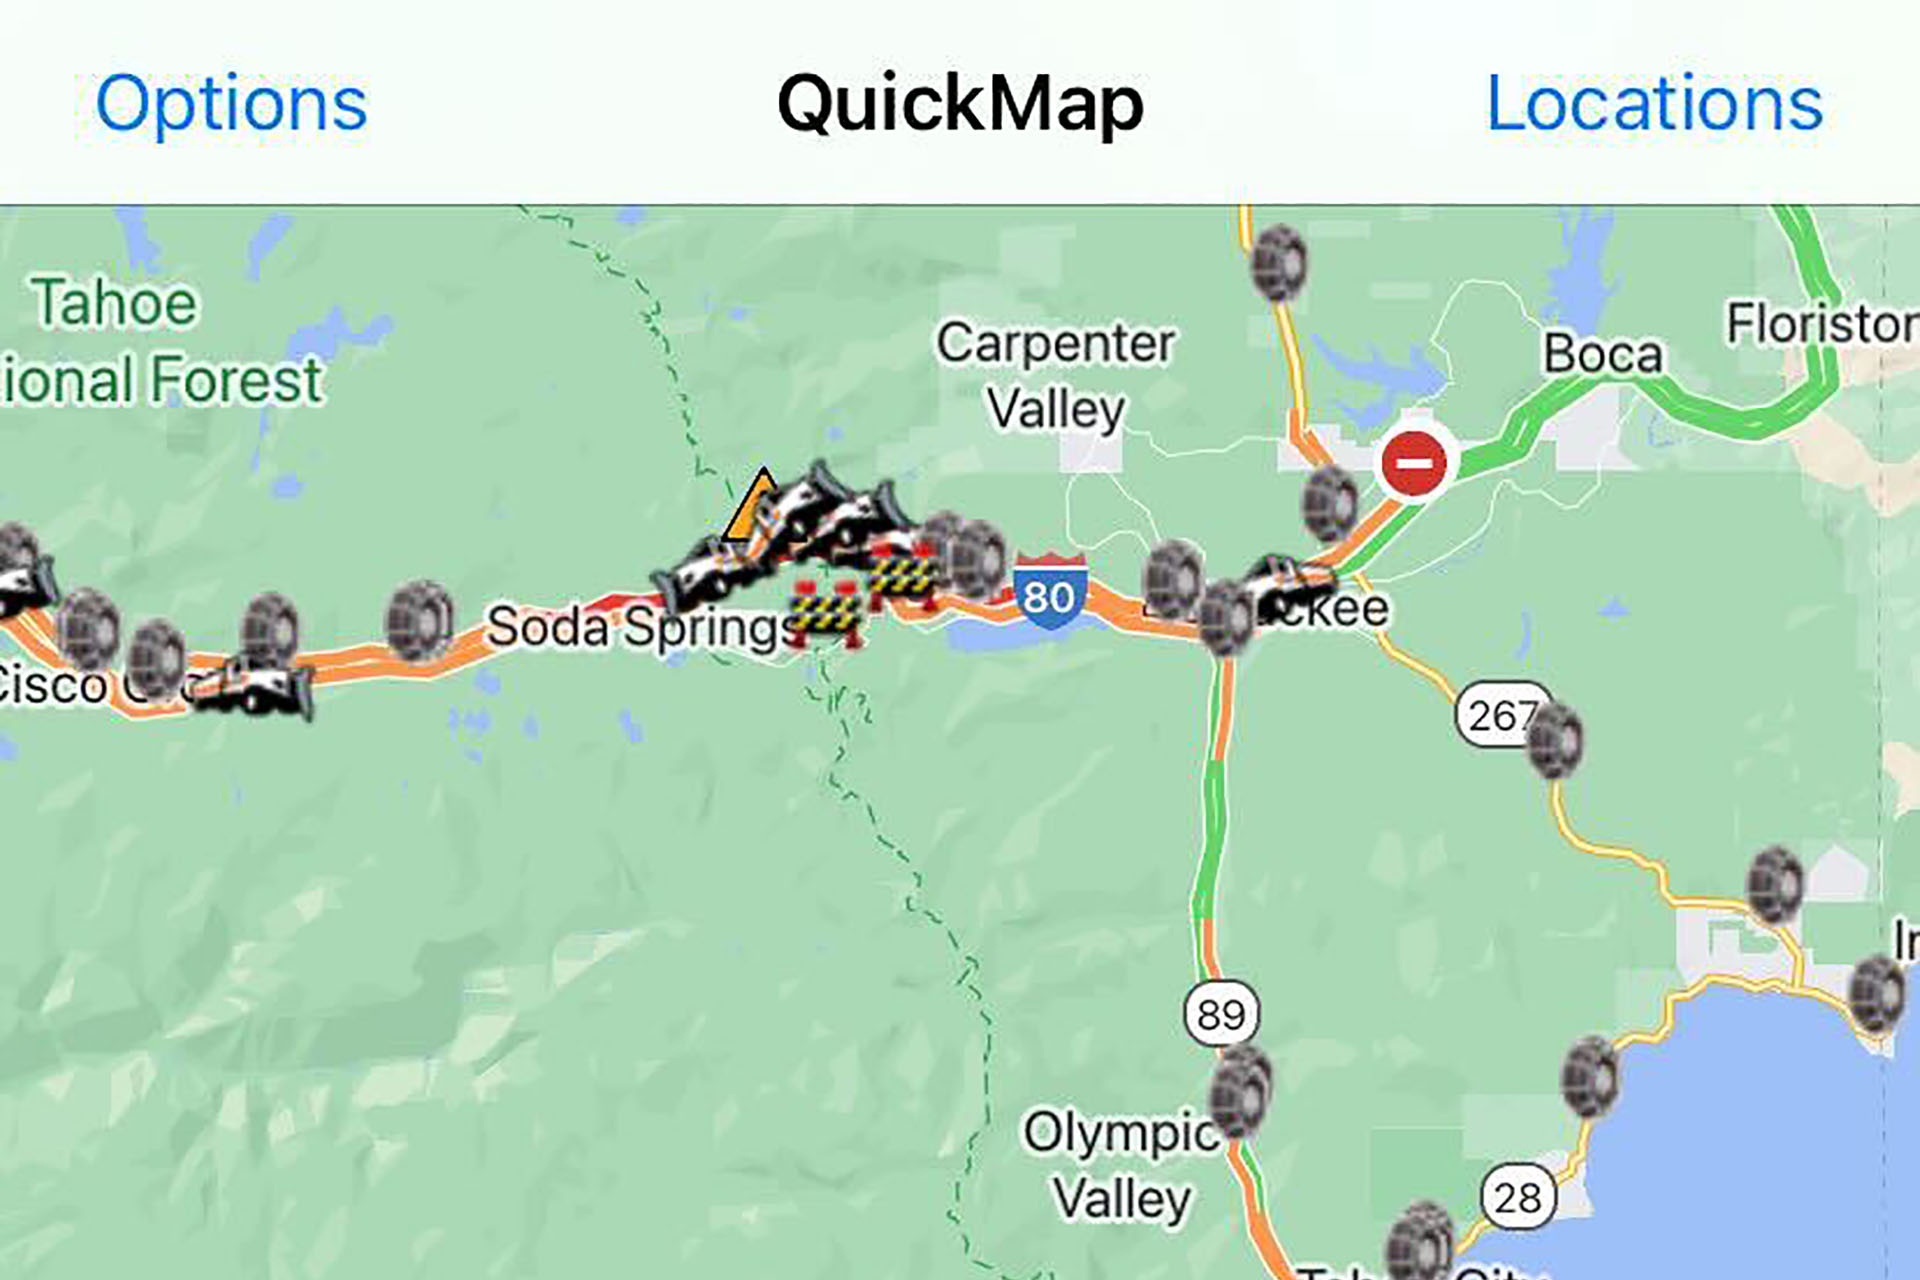 A screenshot of a graphical interface, with light green indicated earth, some blue indicating waterways, and a yellow line across it clustered with icons, as well as a blue-and-red award-shaped sign saying "80" to indicate the highway number.